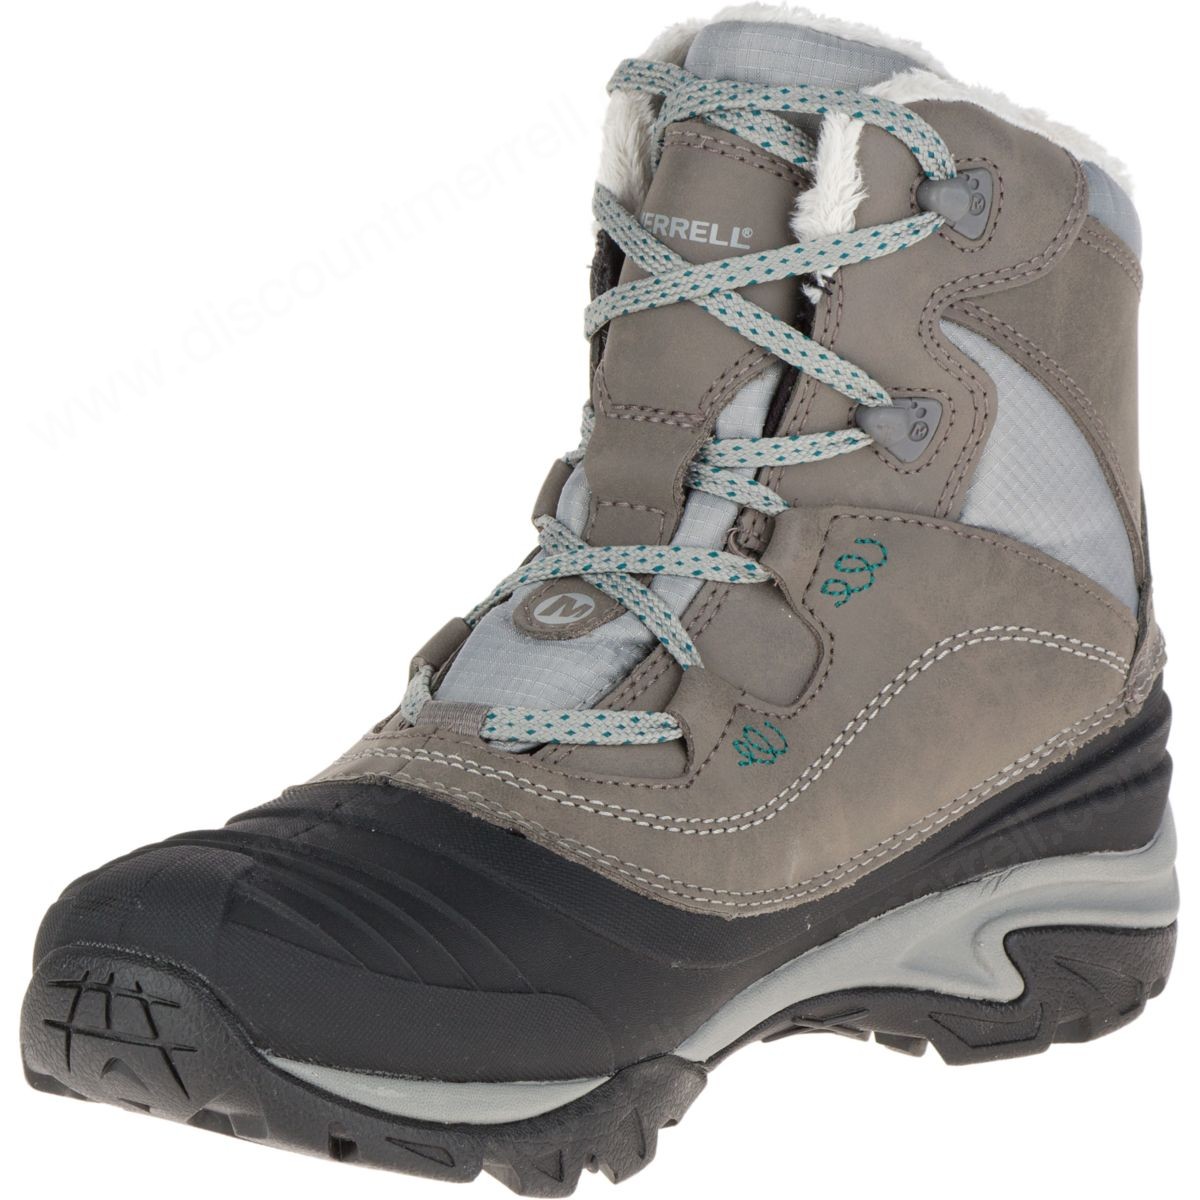 Merrell Lady's Snowbound Mid Waterproof Charcoal - -5